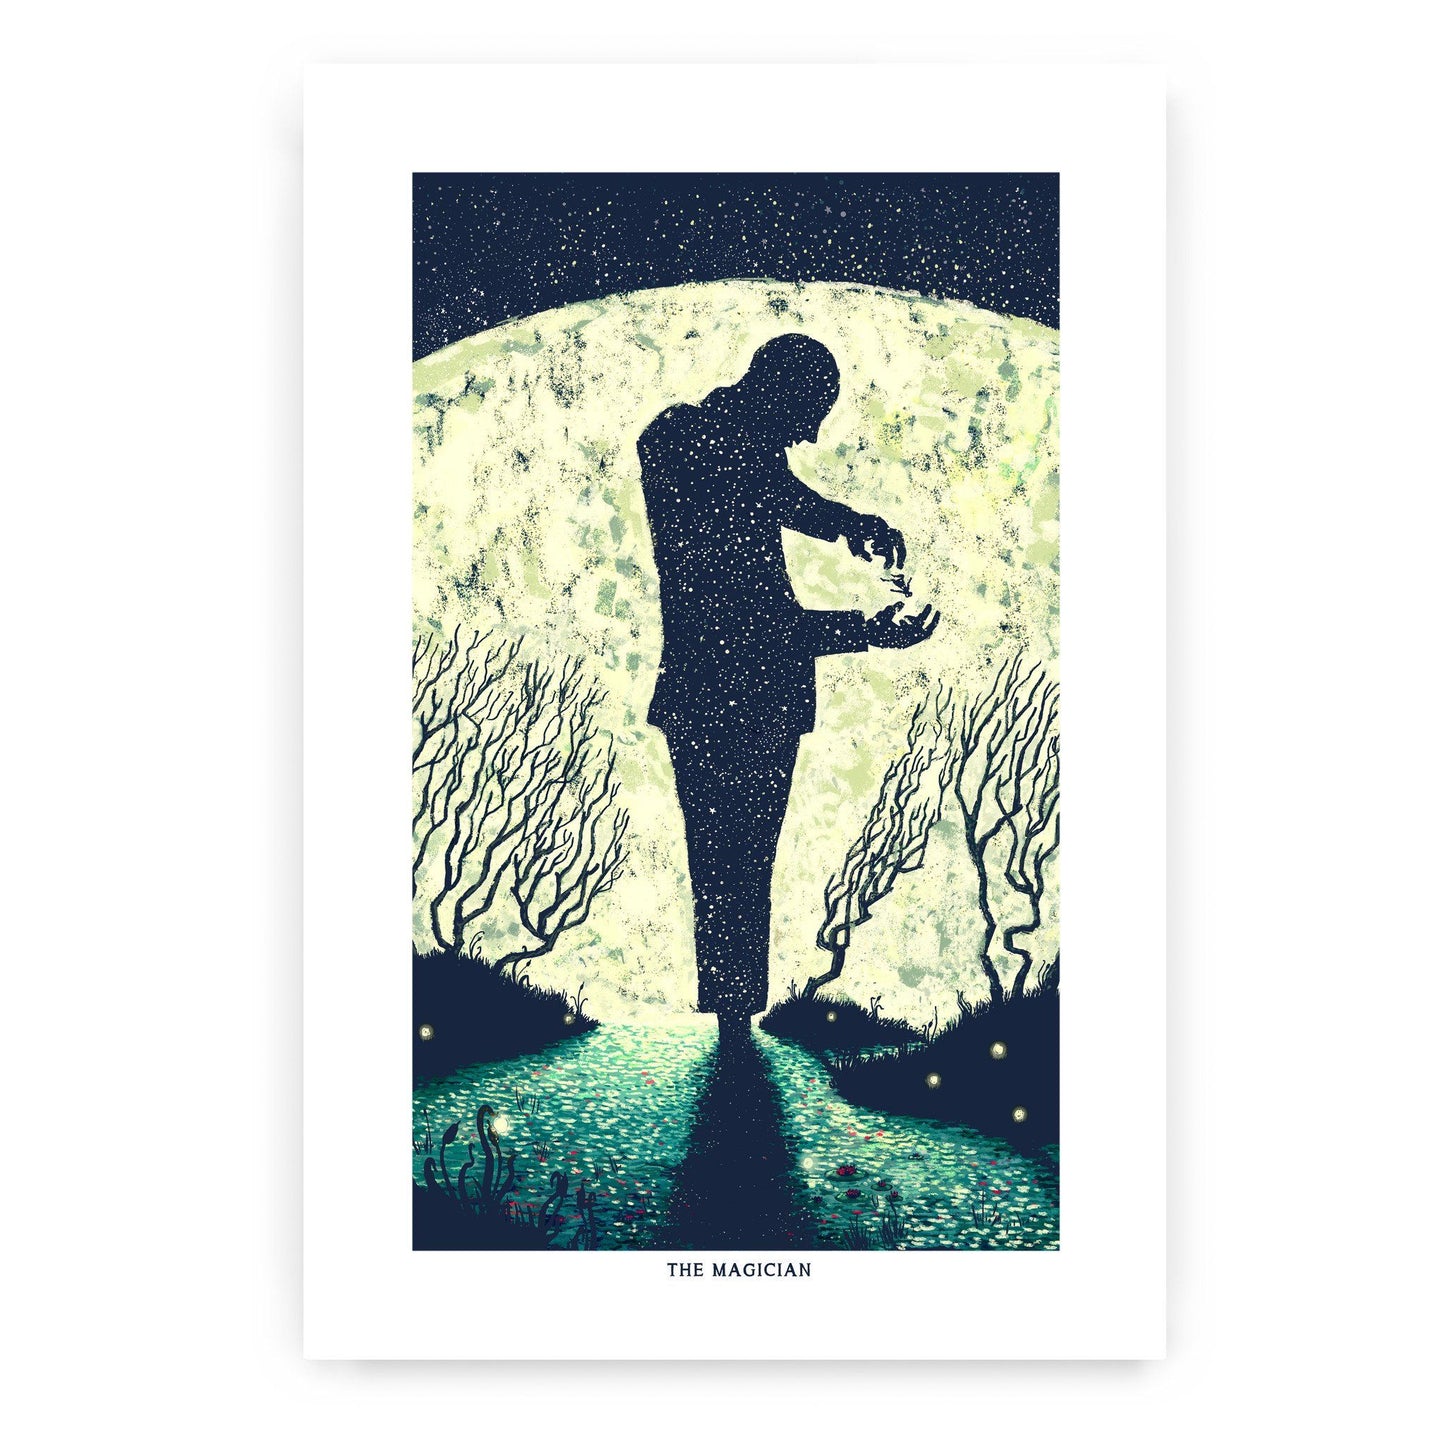 The Magician (Limited Edition of 200) Print James R. Eads